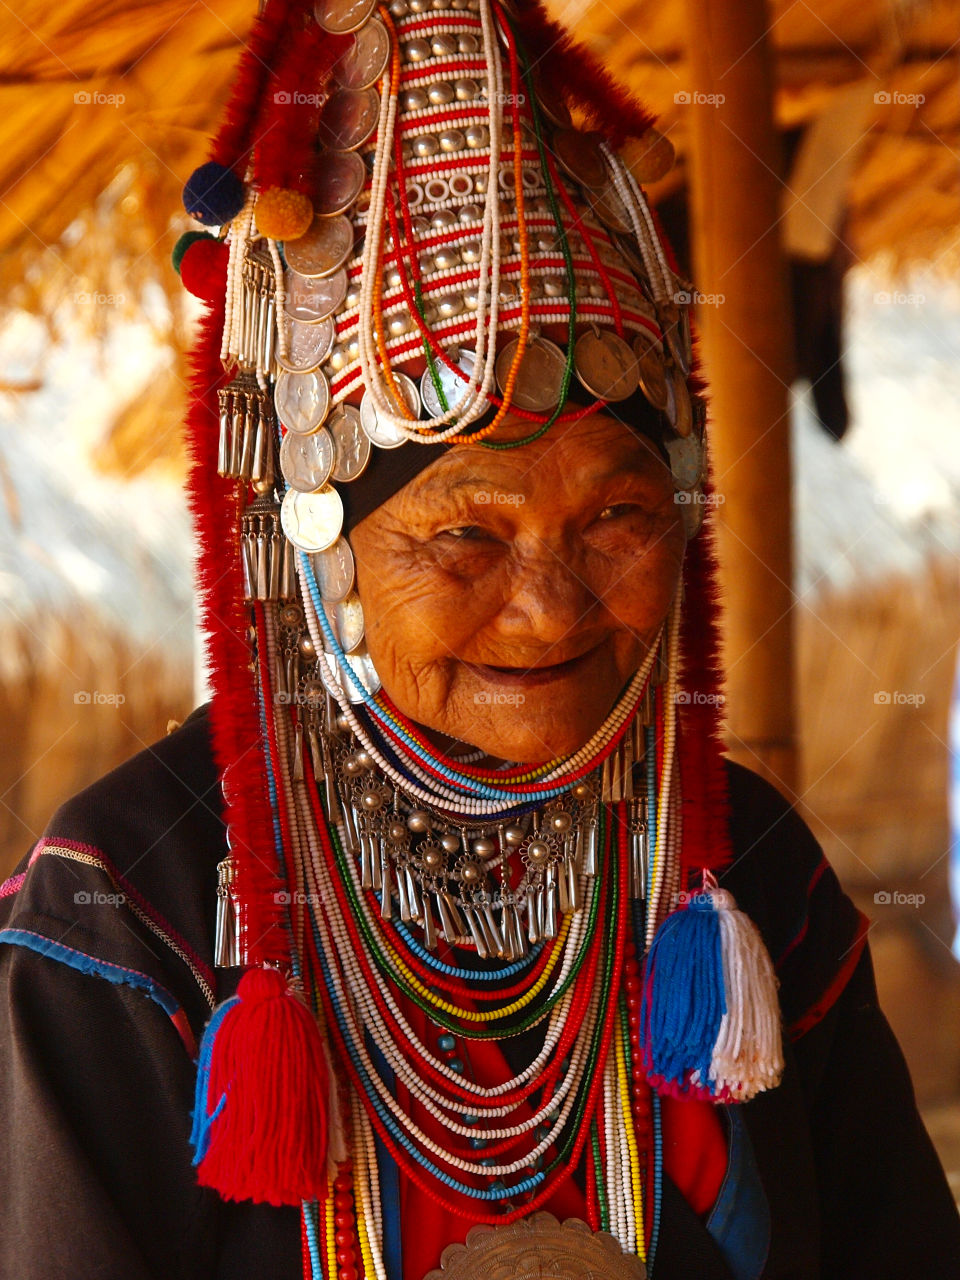 An elderly akha indigenous woman in the North of Thailand